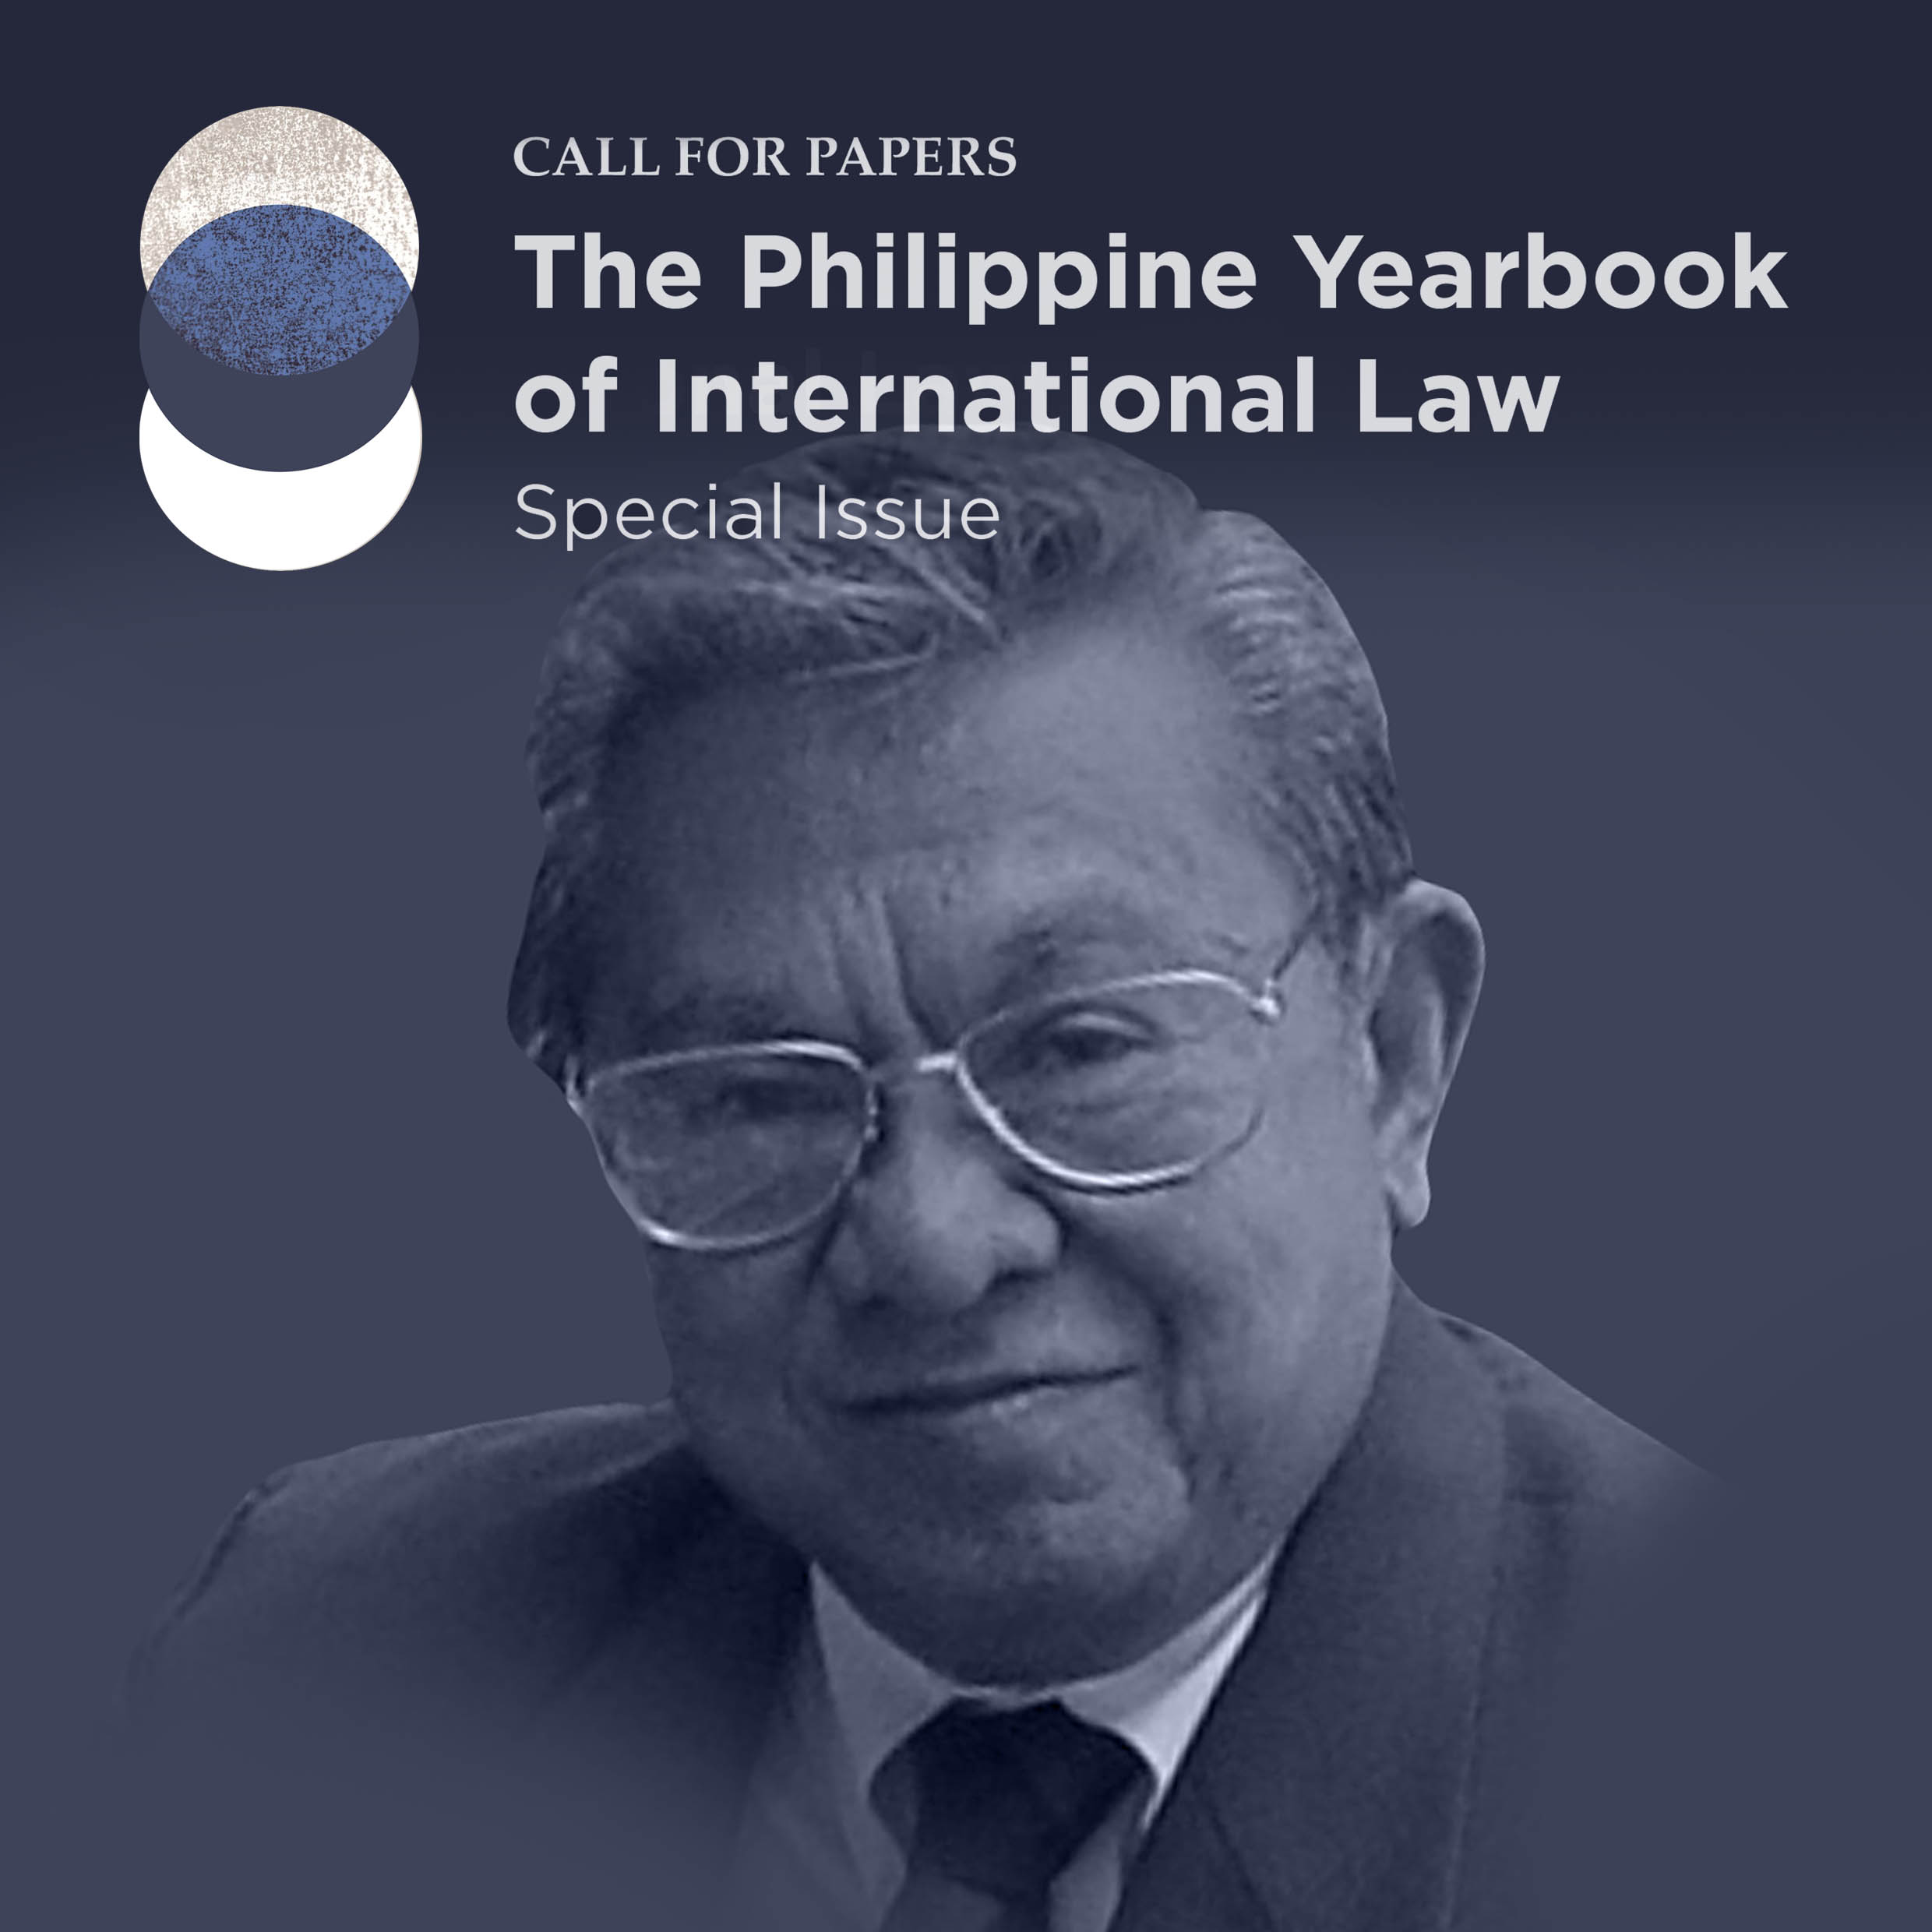 Call for Papers: The Philippine Yearbook of International Law (PYIL)